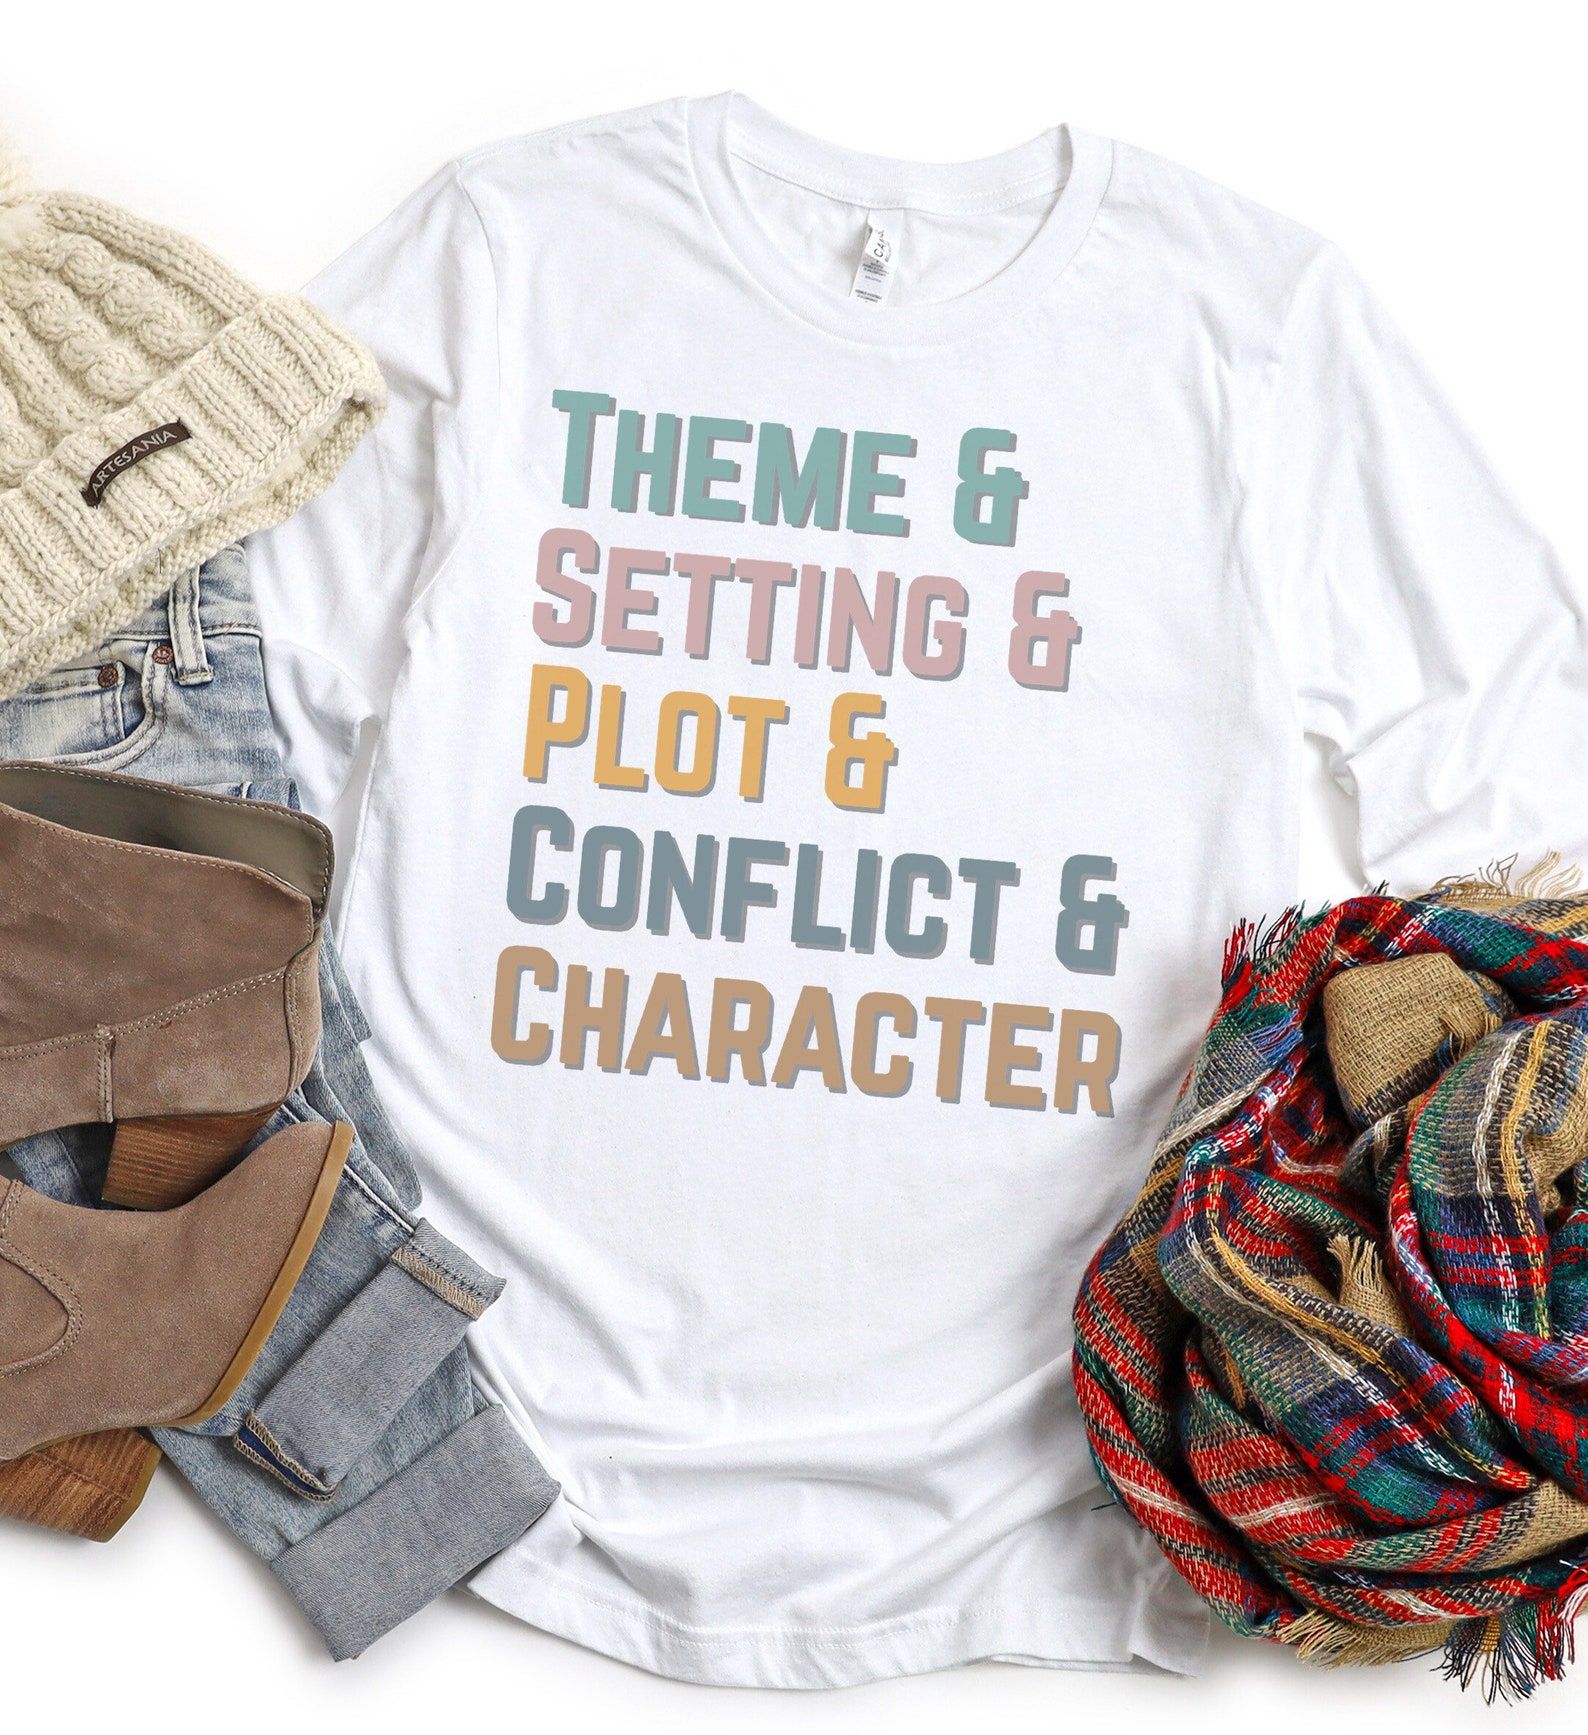 Image of a white t-shirt which reads "theme & setting & plot & conflict & character" in pastel colors. 